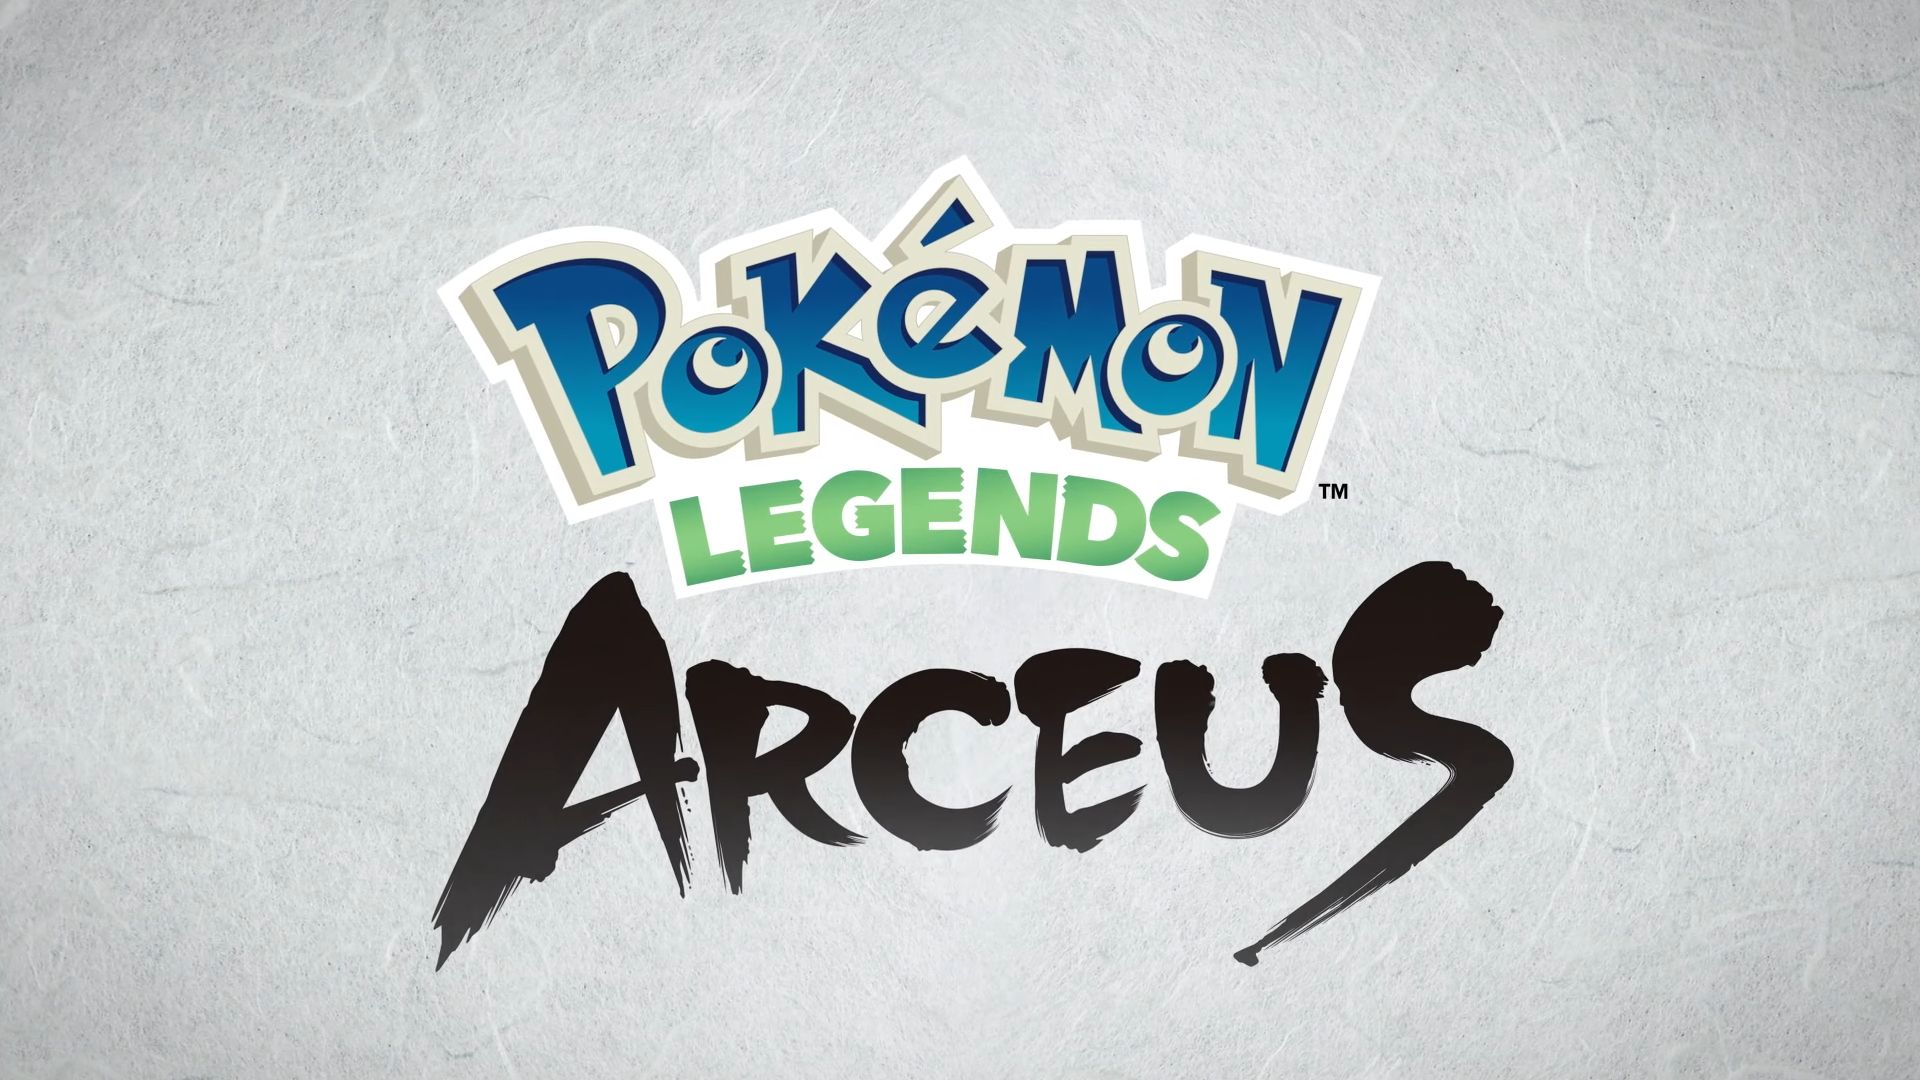 Pokemon Legends: Arceus Announced - Open World Title Out in Early 2022